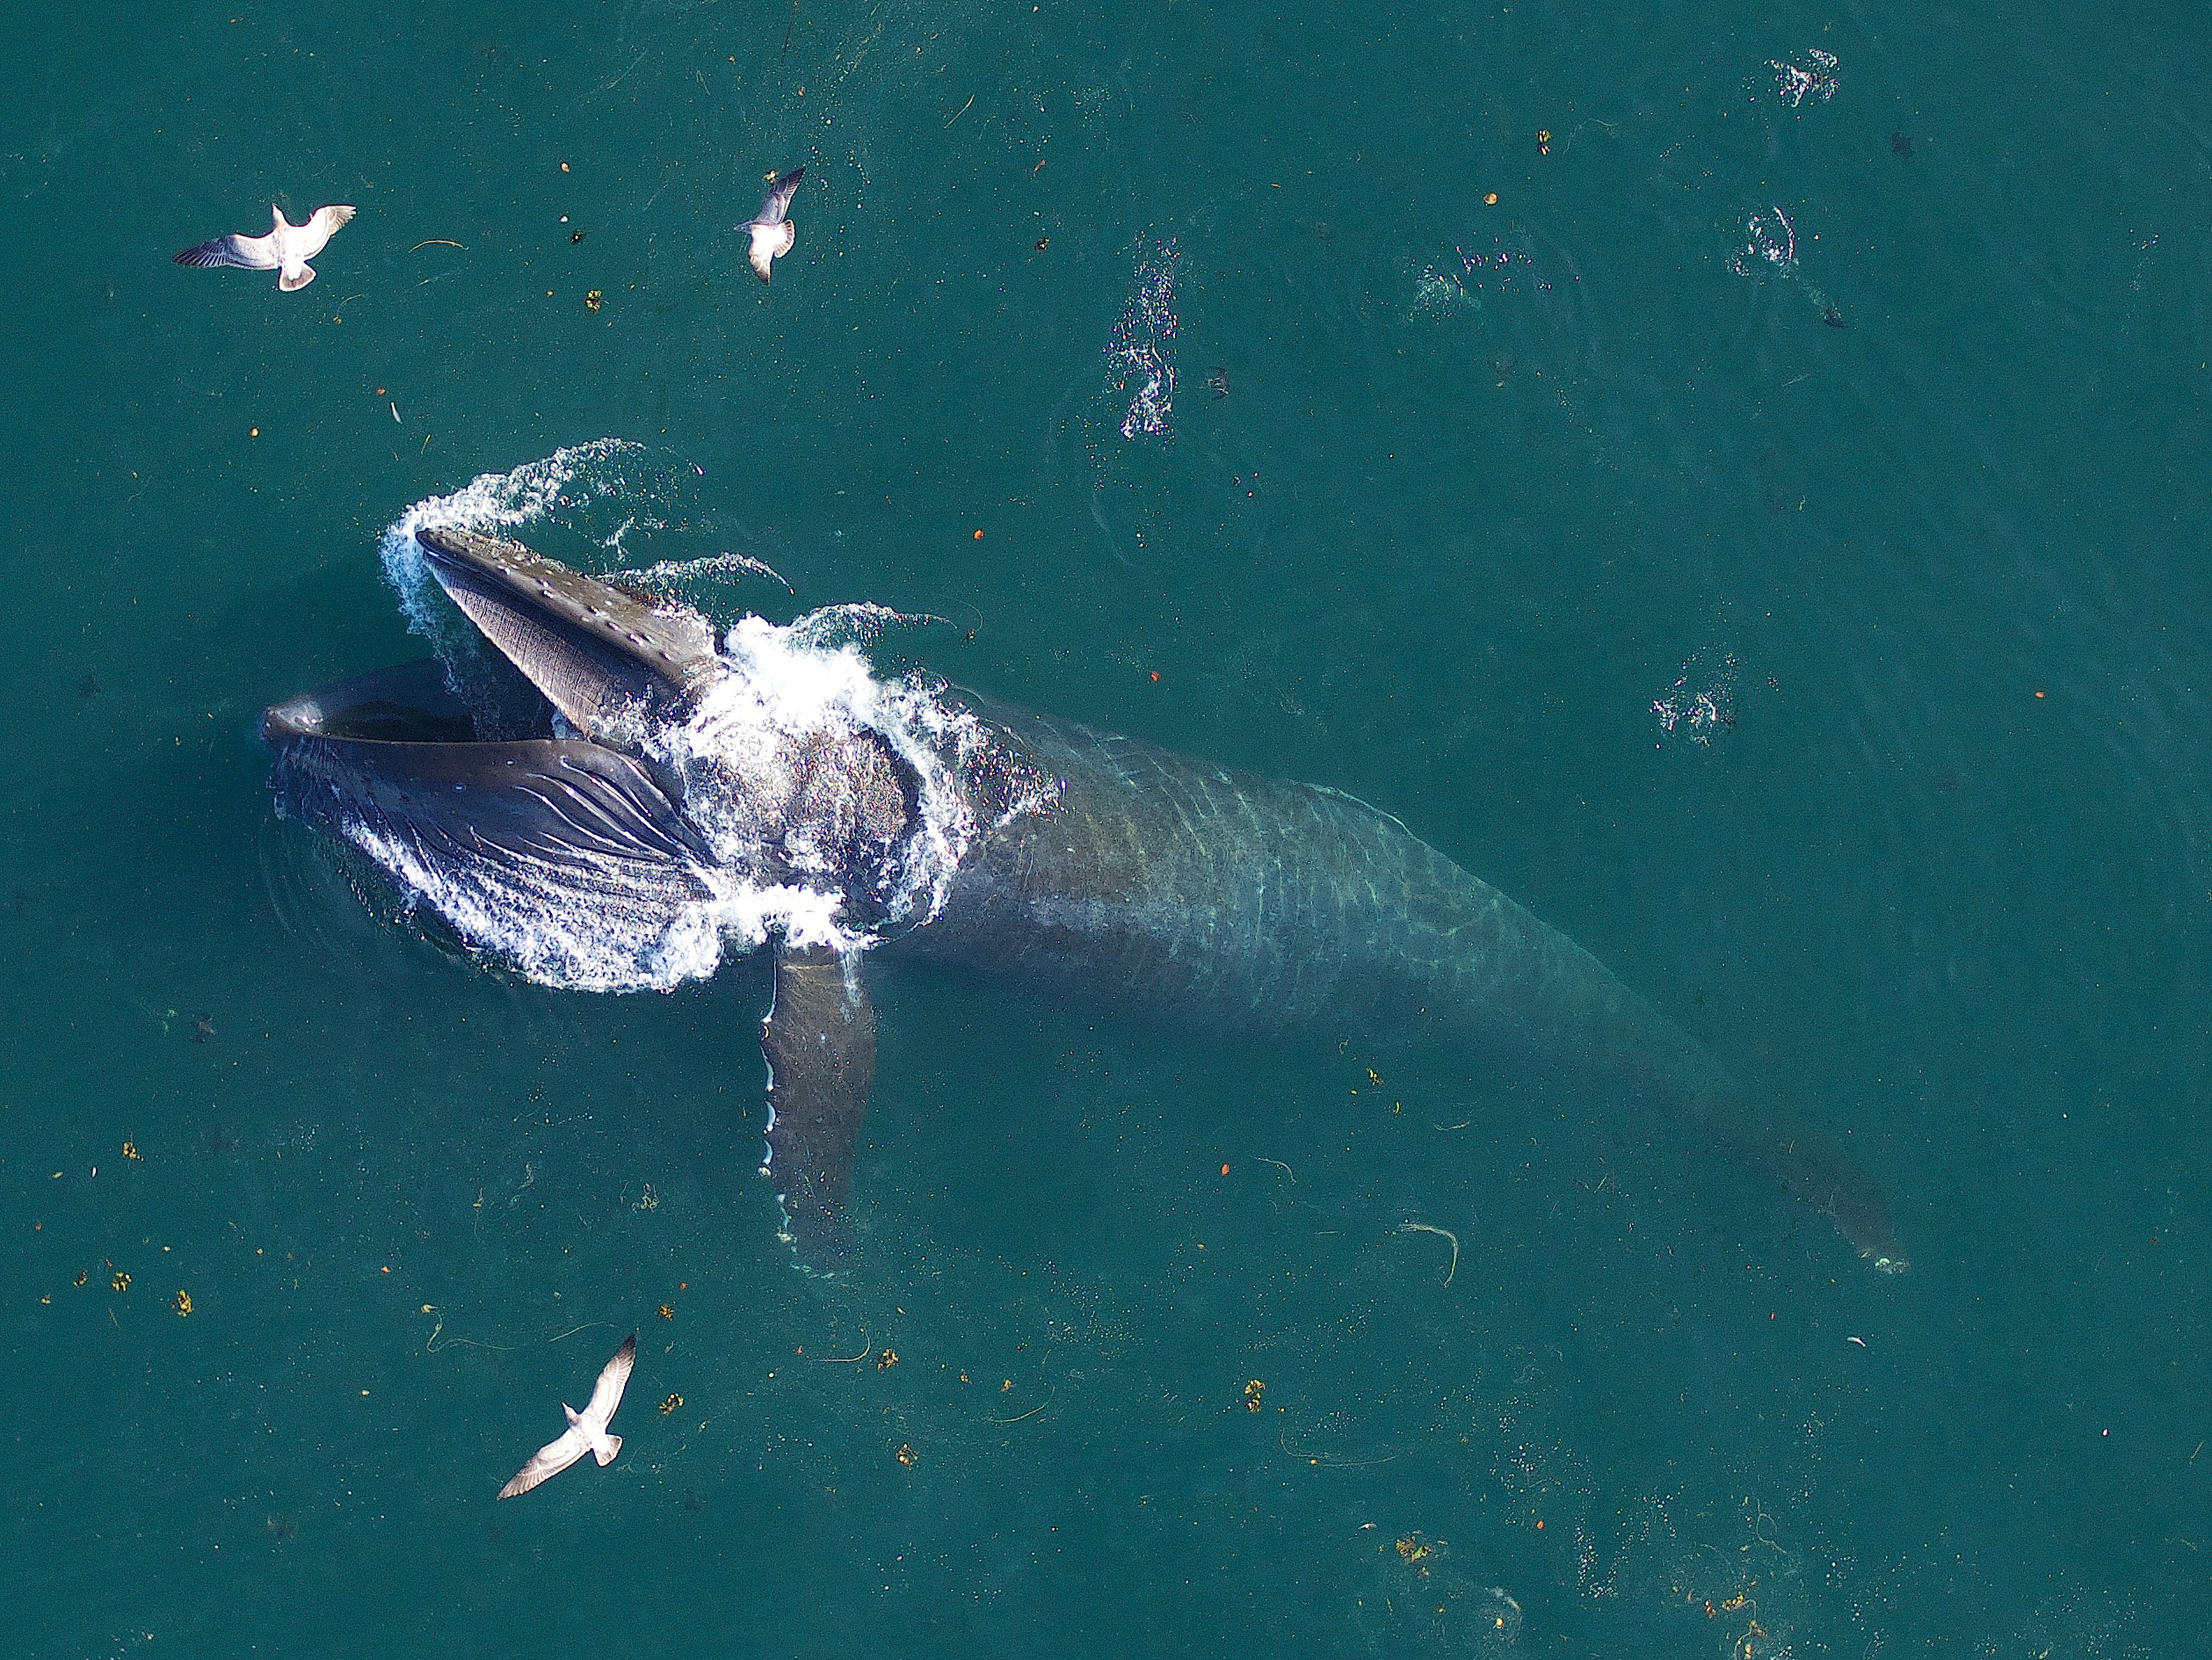 A blue whale with a removable tag surfaces off the coast of California, U.S. in this undated handout photograph. Goldbogen Laboratory, Stanford University and Duke University Marine Robotics and Remote Sensing under NOAA/NMFS permits/Handout via REUTERS